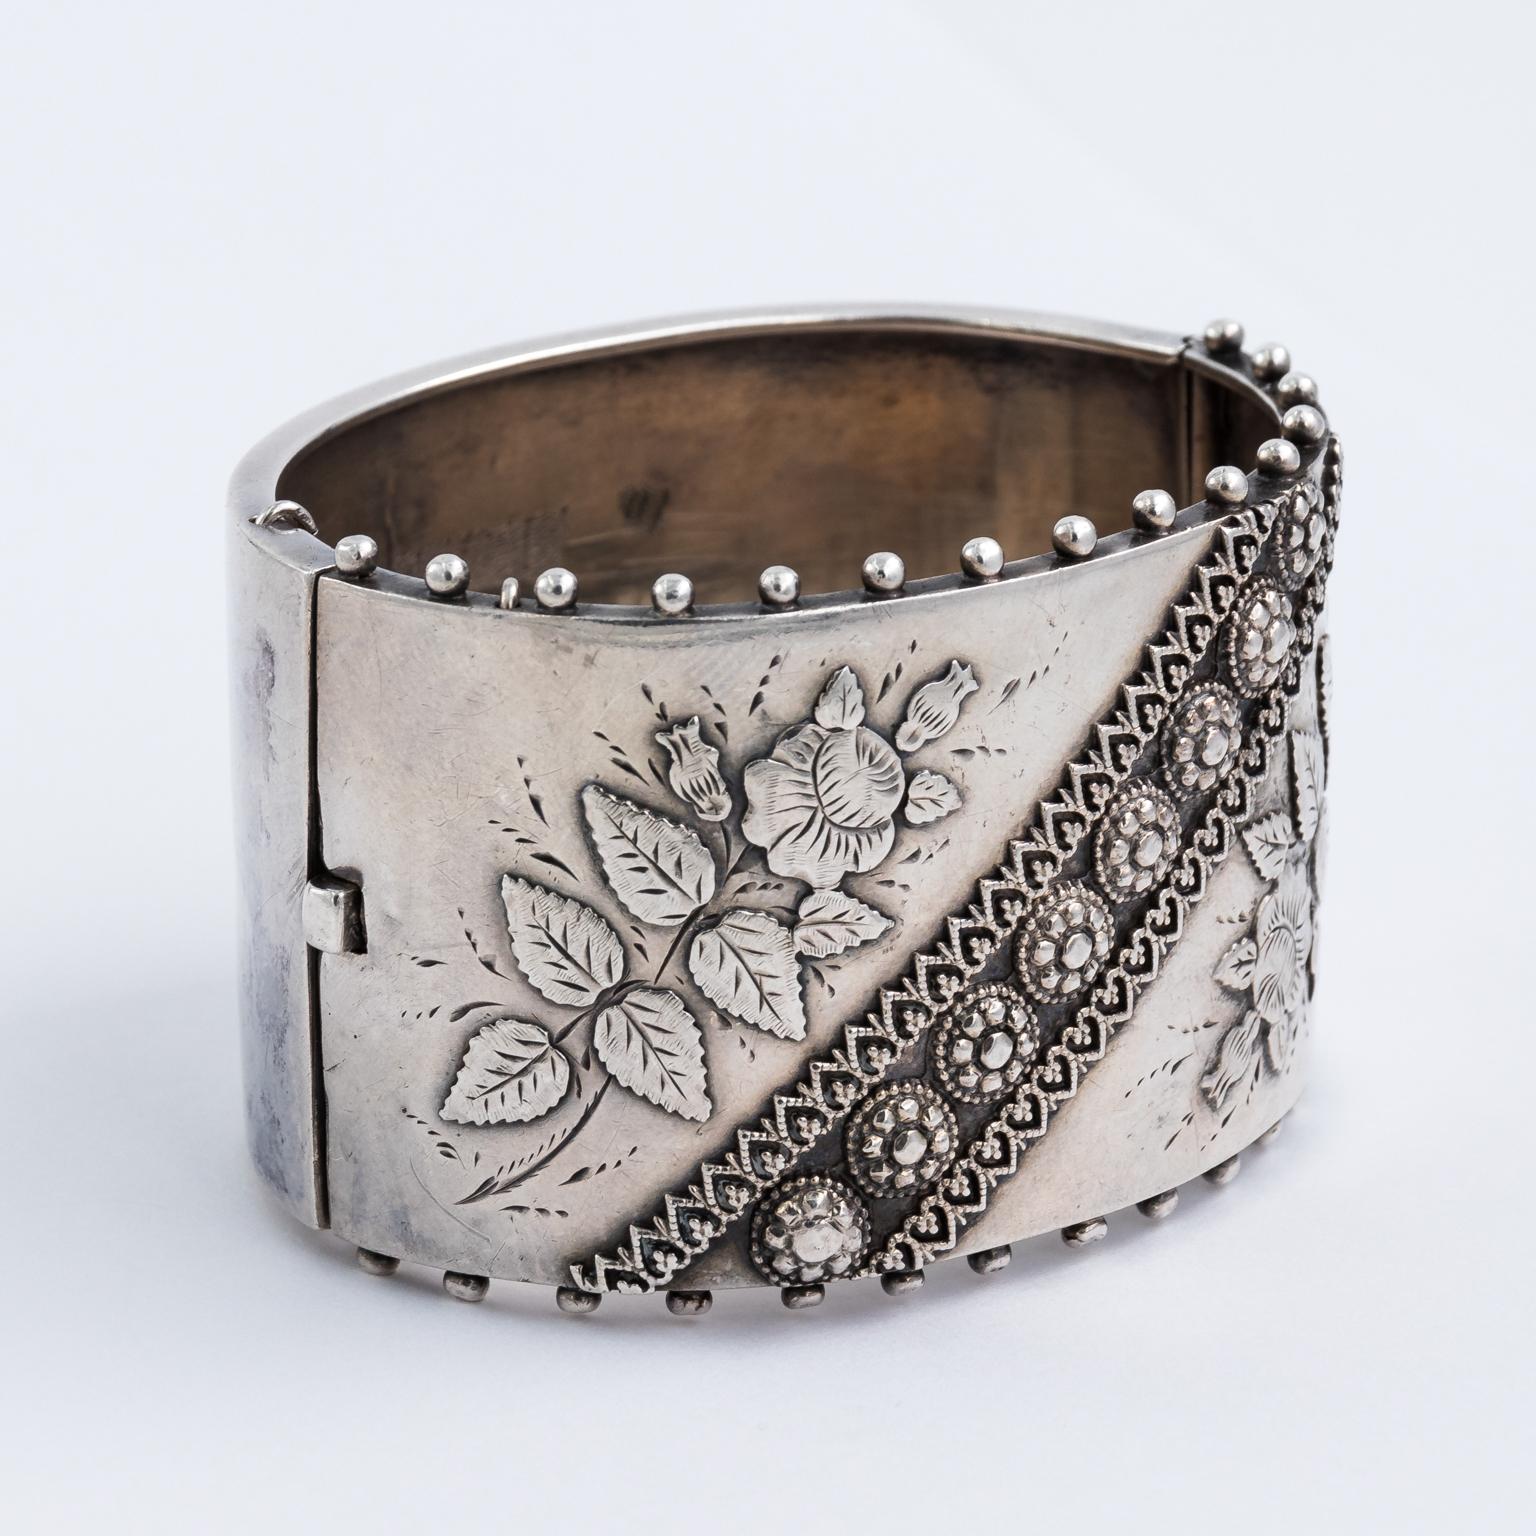 Circa 1880s English Victorian style silver bangle cuff bracelet with repousse Aesthetic Movement style floral motifs and linear trim. Hand marked in Sterling Silver with hinged clasp and safety chain.
